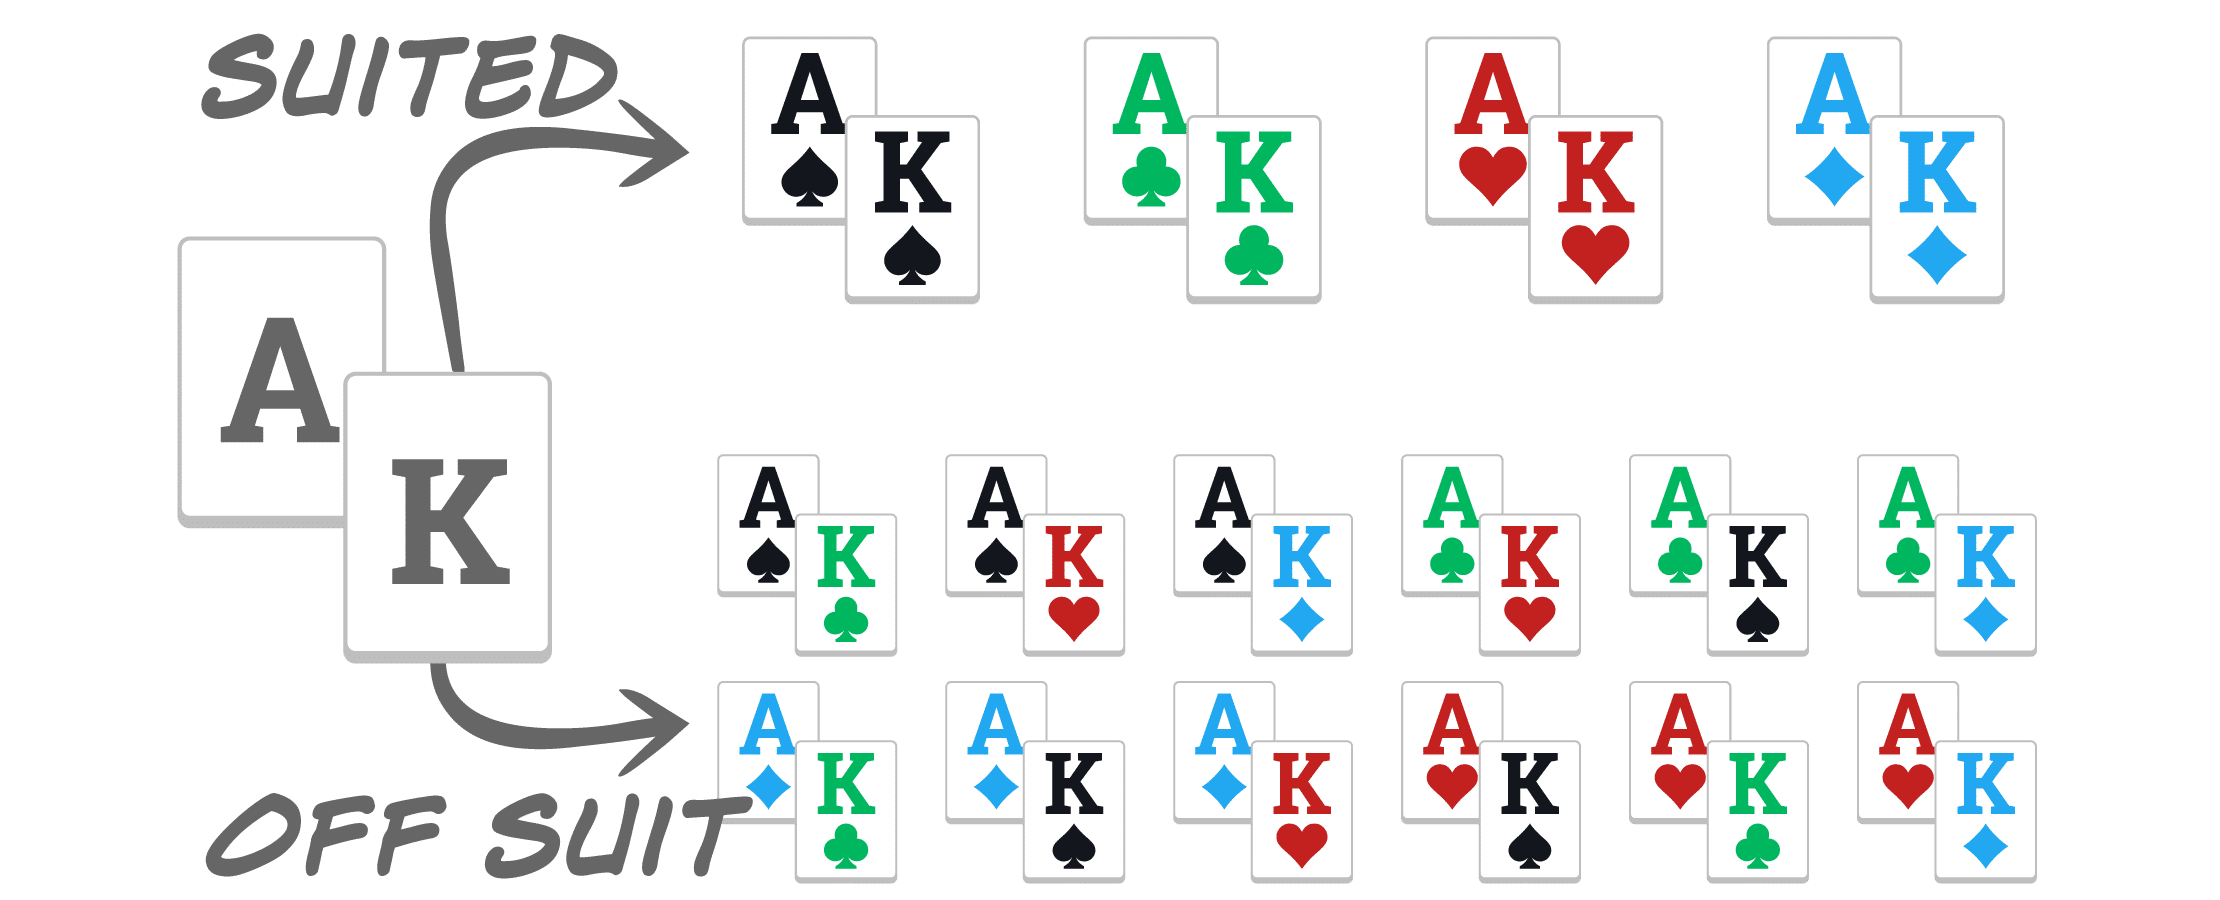 Three of a Kind vs. Two Pairs - The Math Behind the Result - EasyPoker